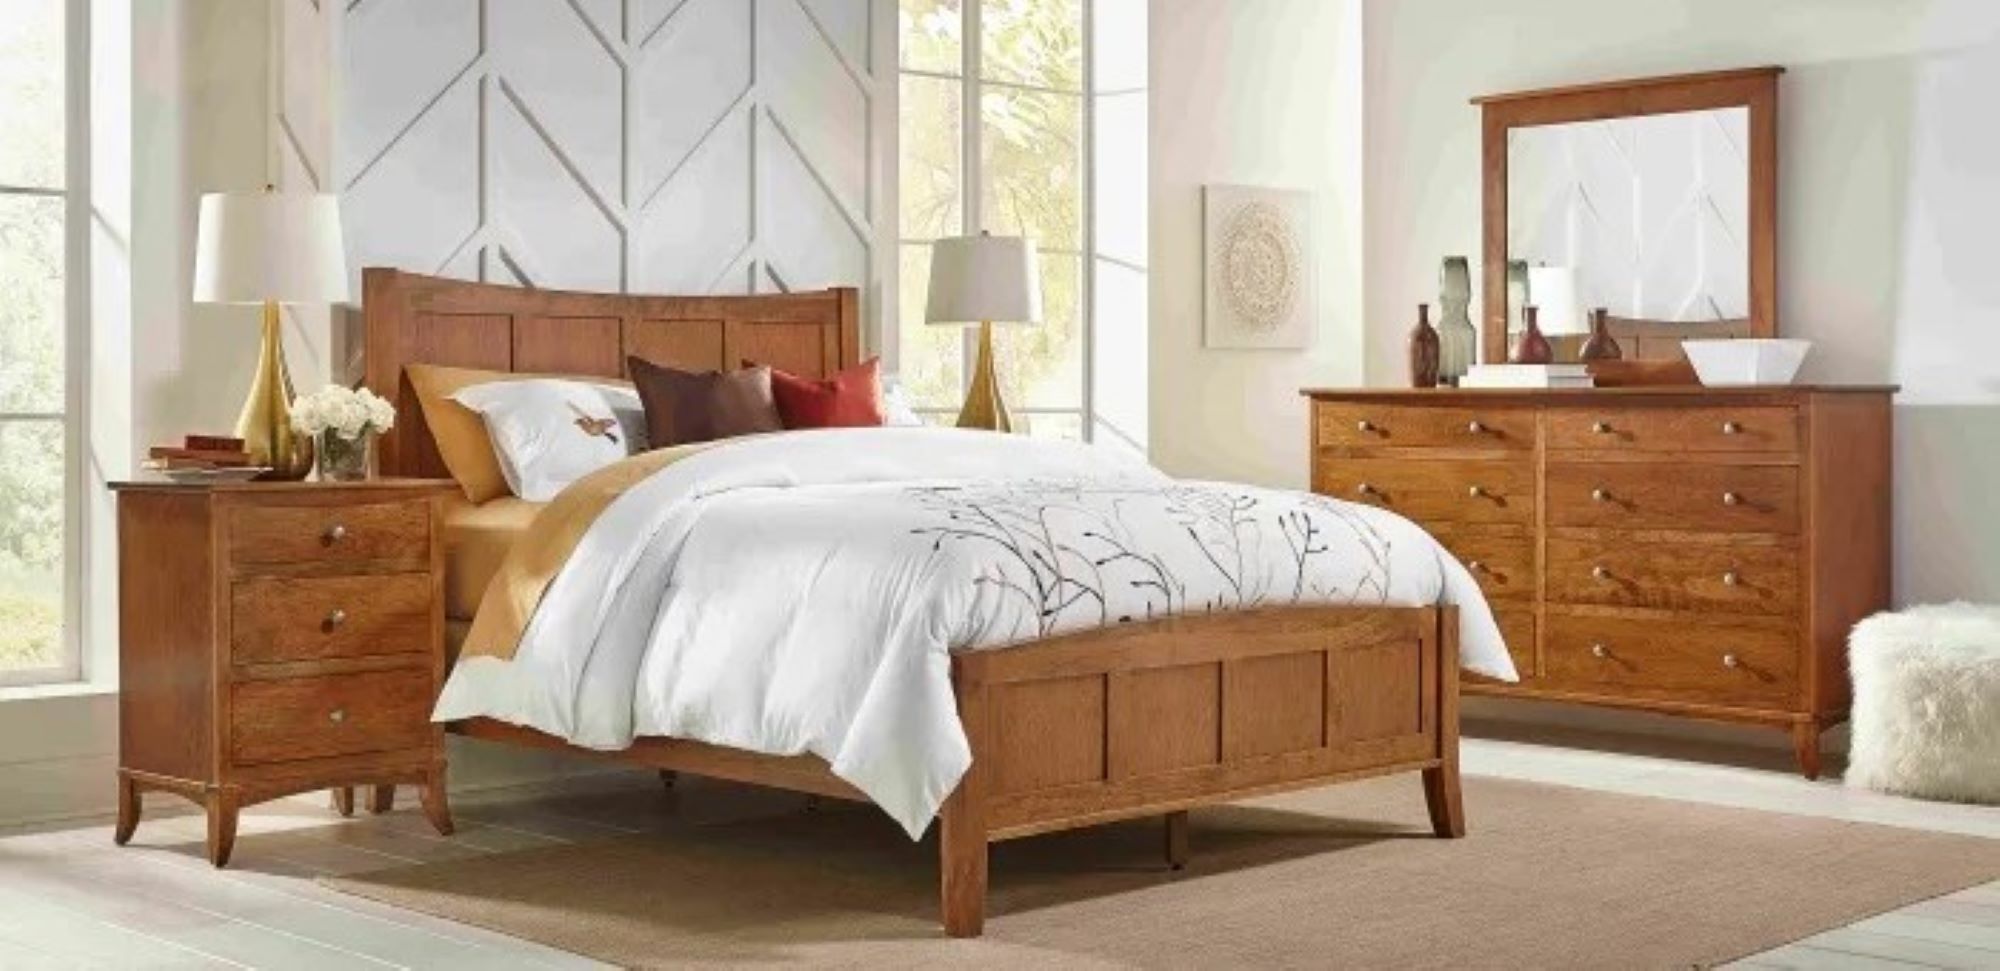 Bedroom Furniture For Sale in Cape Cod, MA